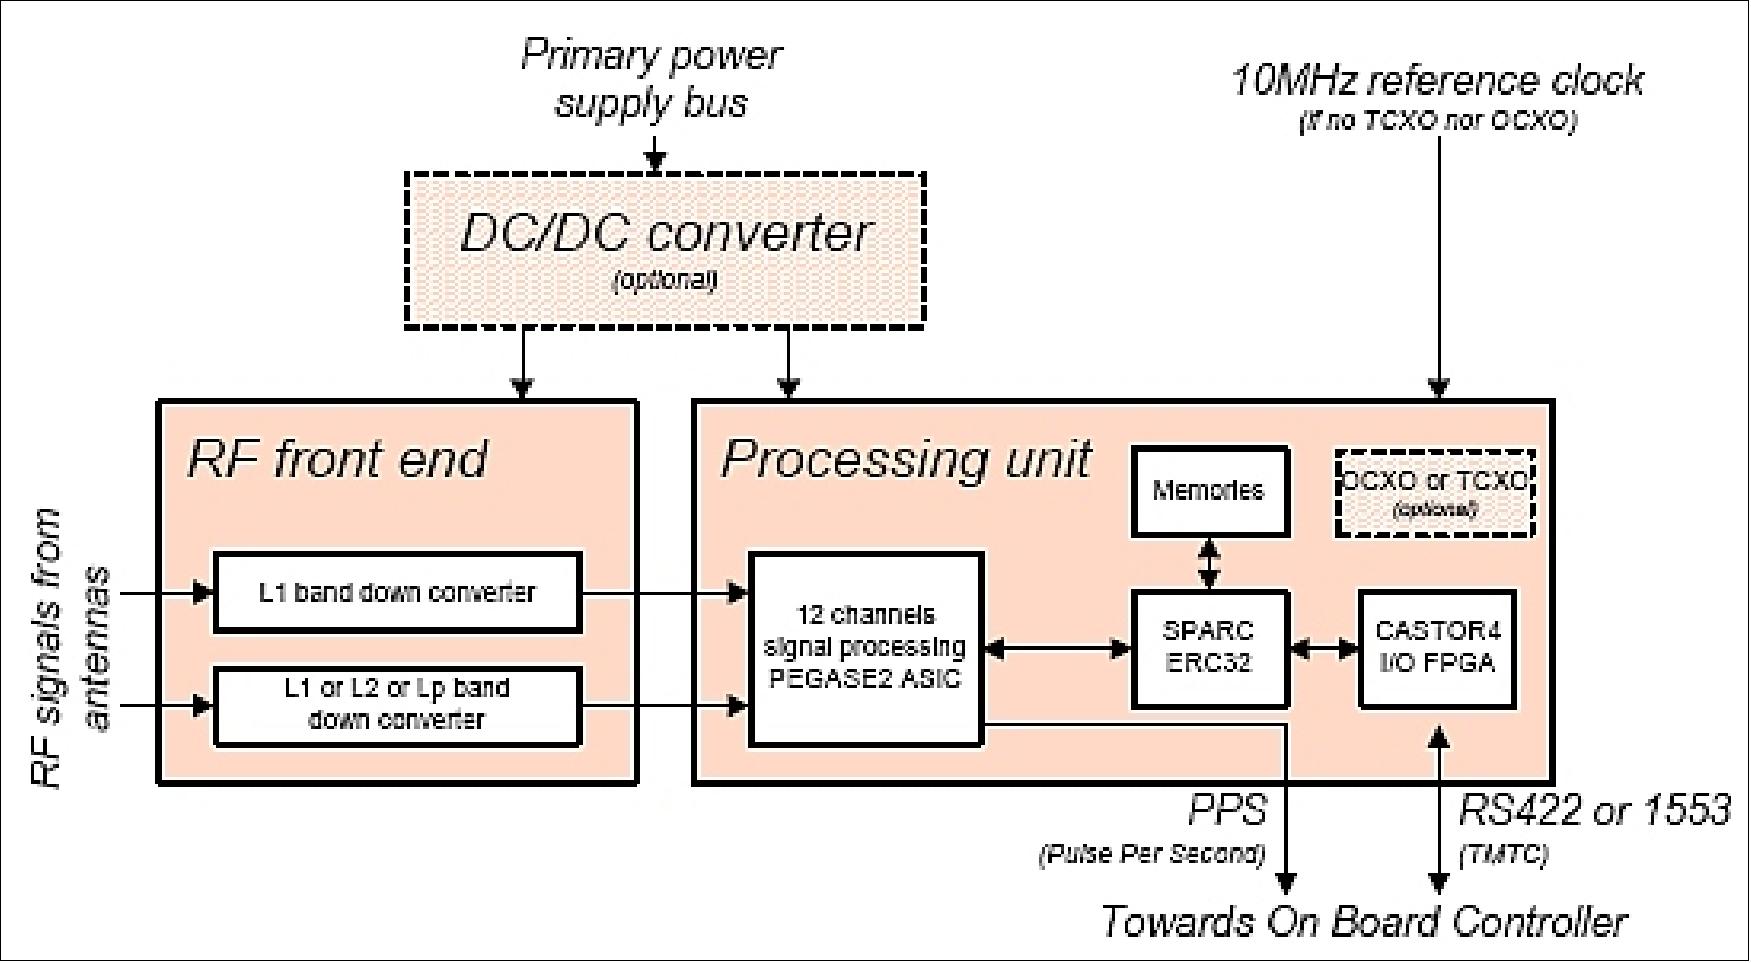 Figure 6: Functional architecture of the T3000 G2 GPS receiver (image credit: TAS)